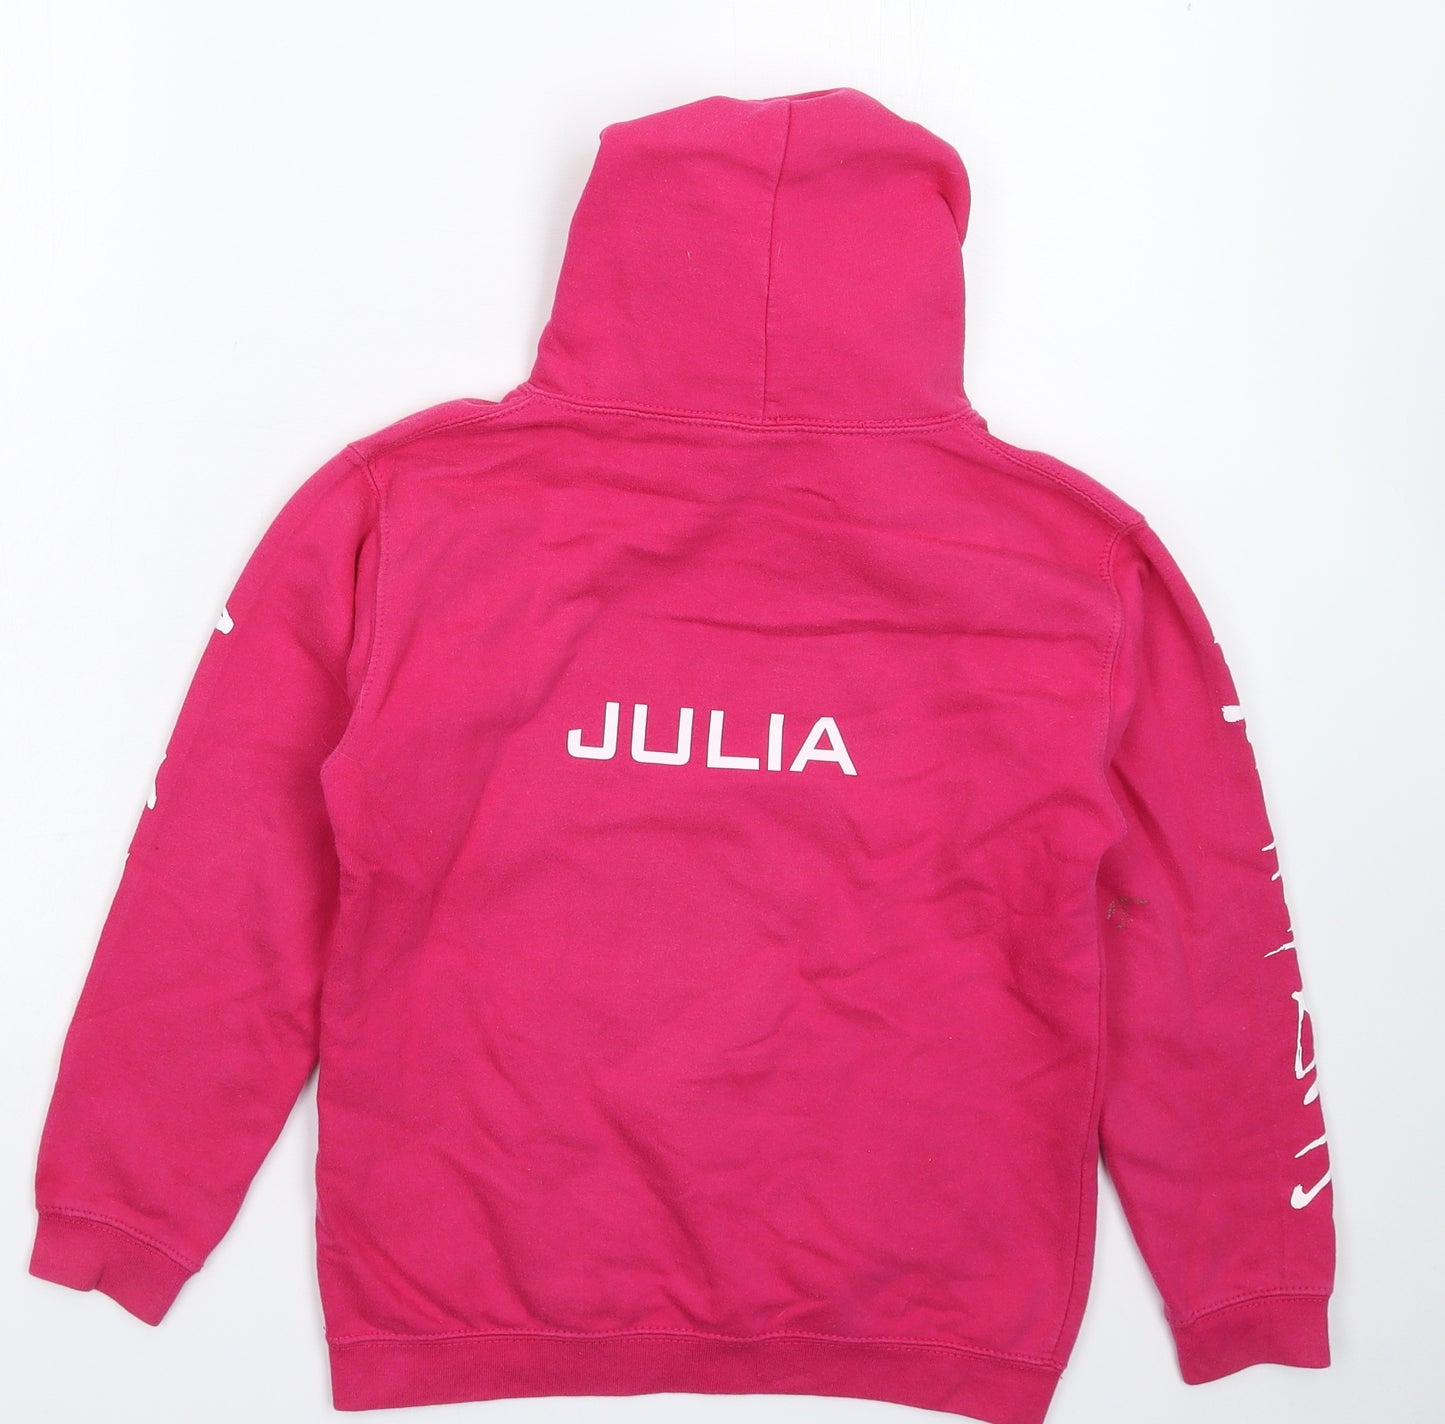 All We Do is Girls Pink   Pullover Hoodie Size 10-11 Years